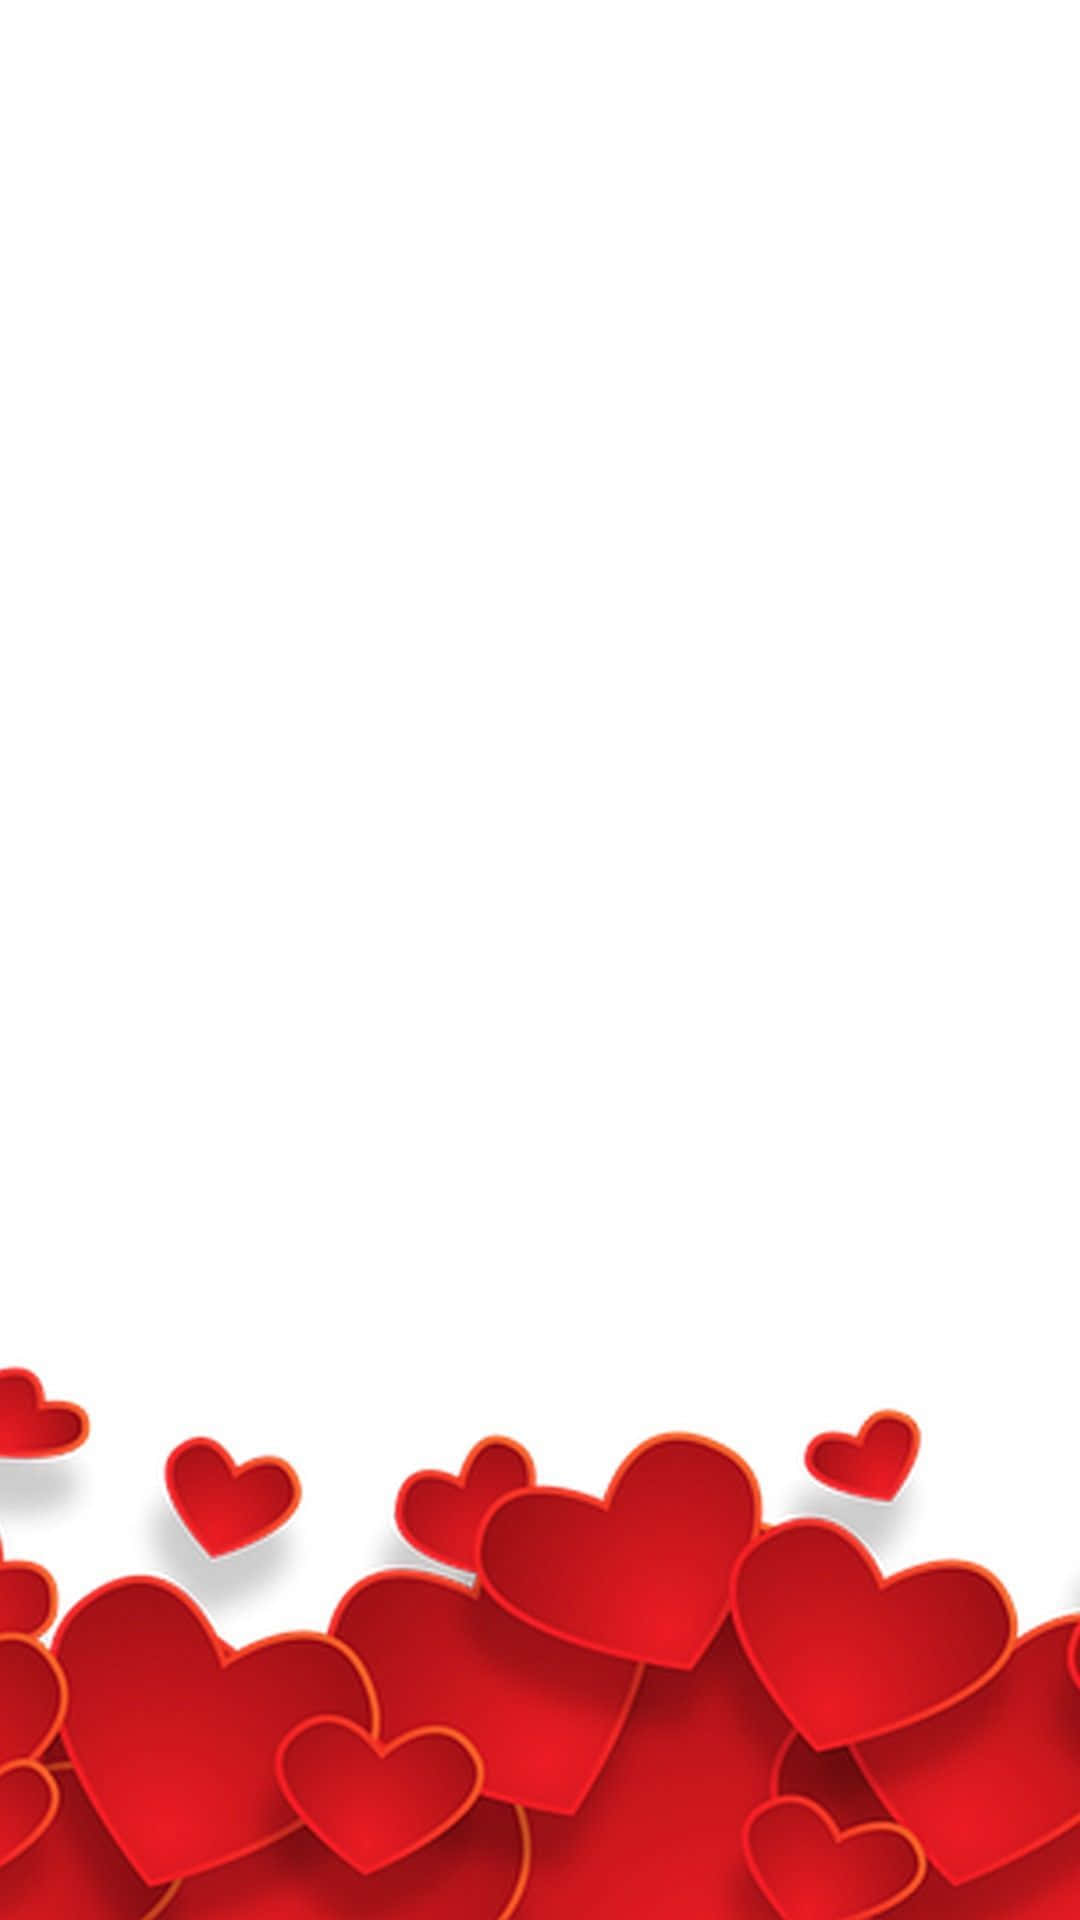 Simple Red Hearts Love Background